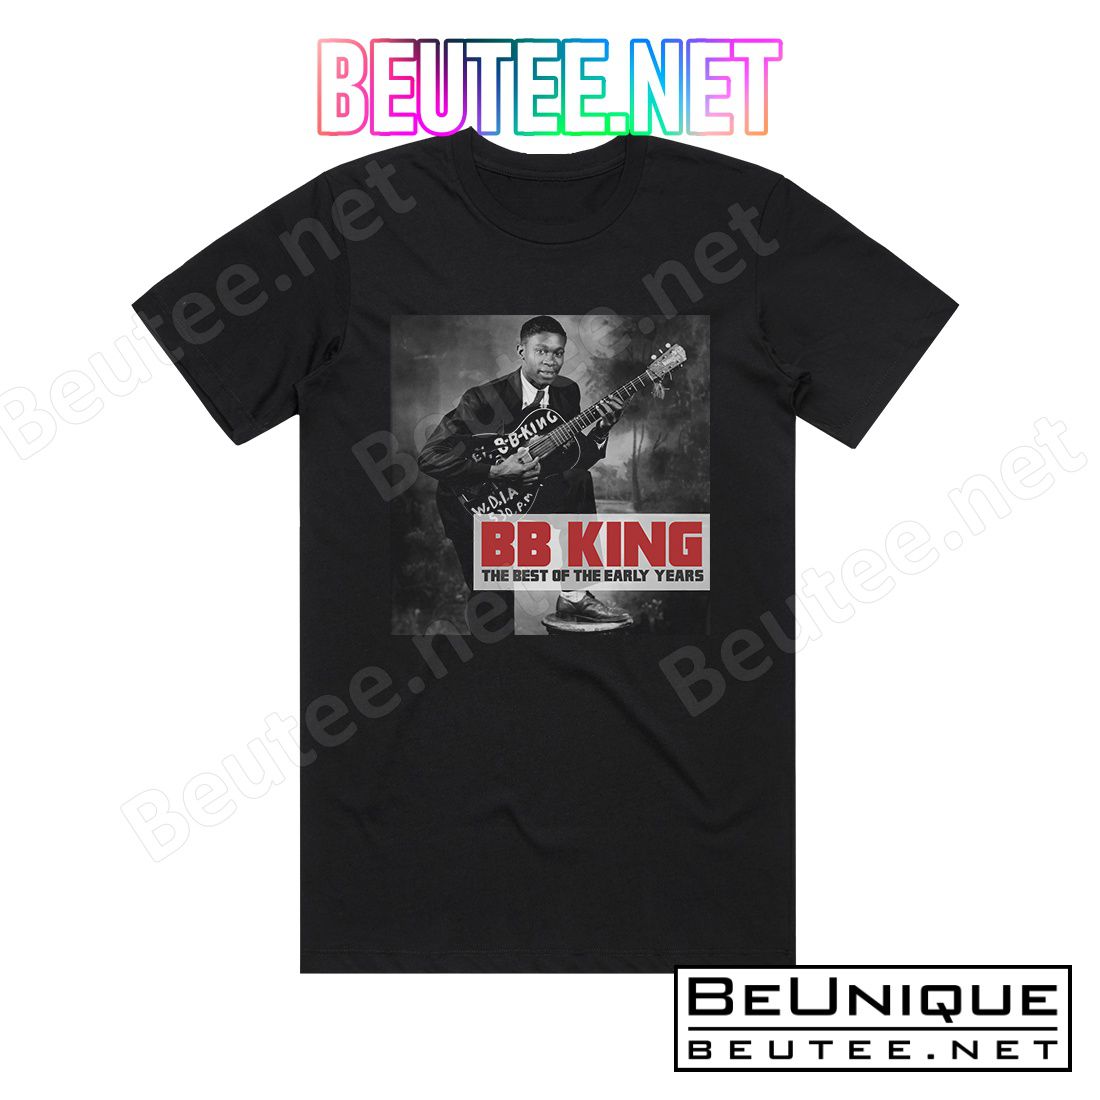 BB King The Best Of The Early Years Album Cover T-Shirt